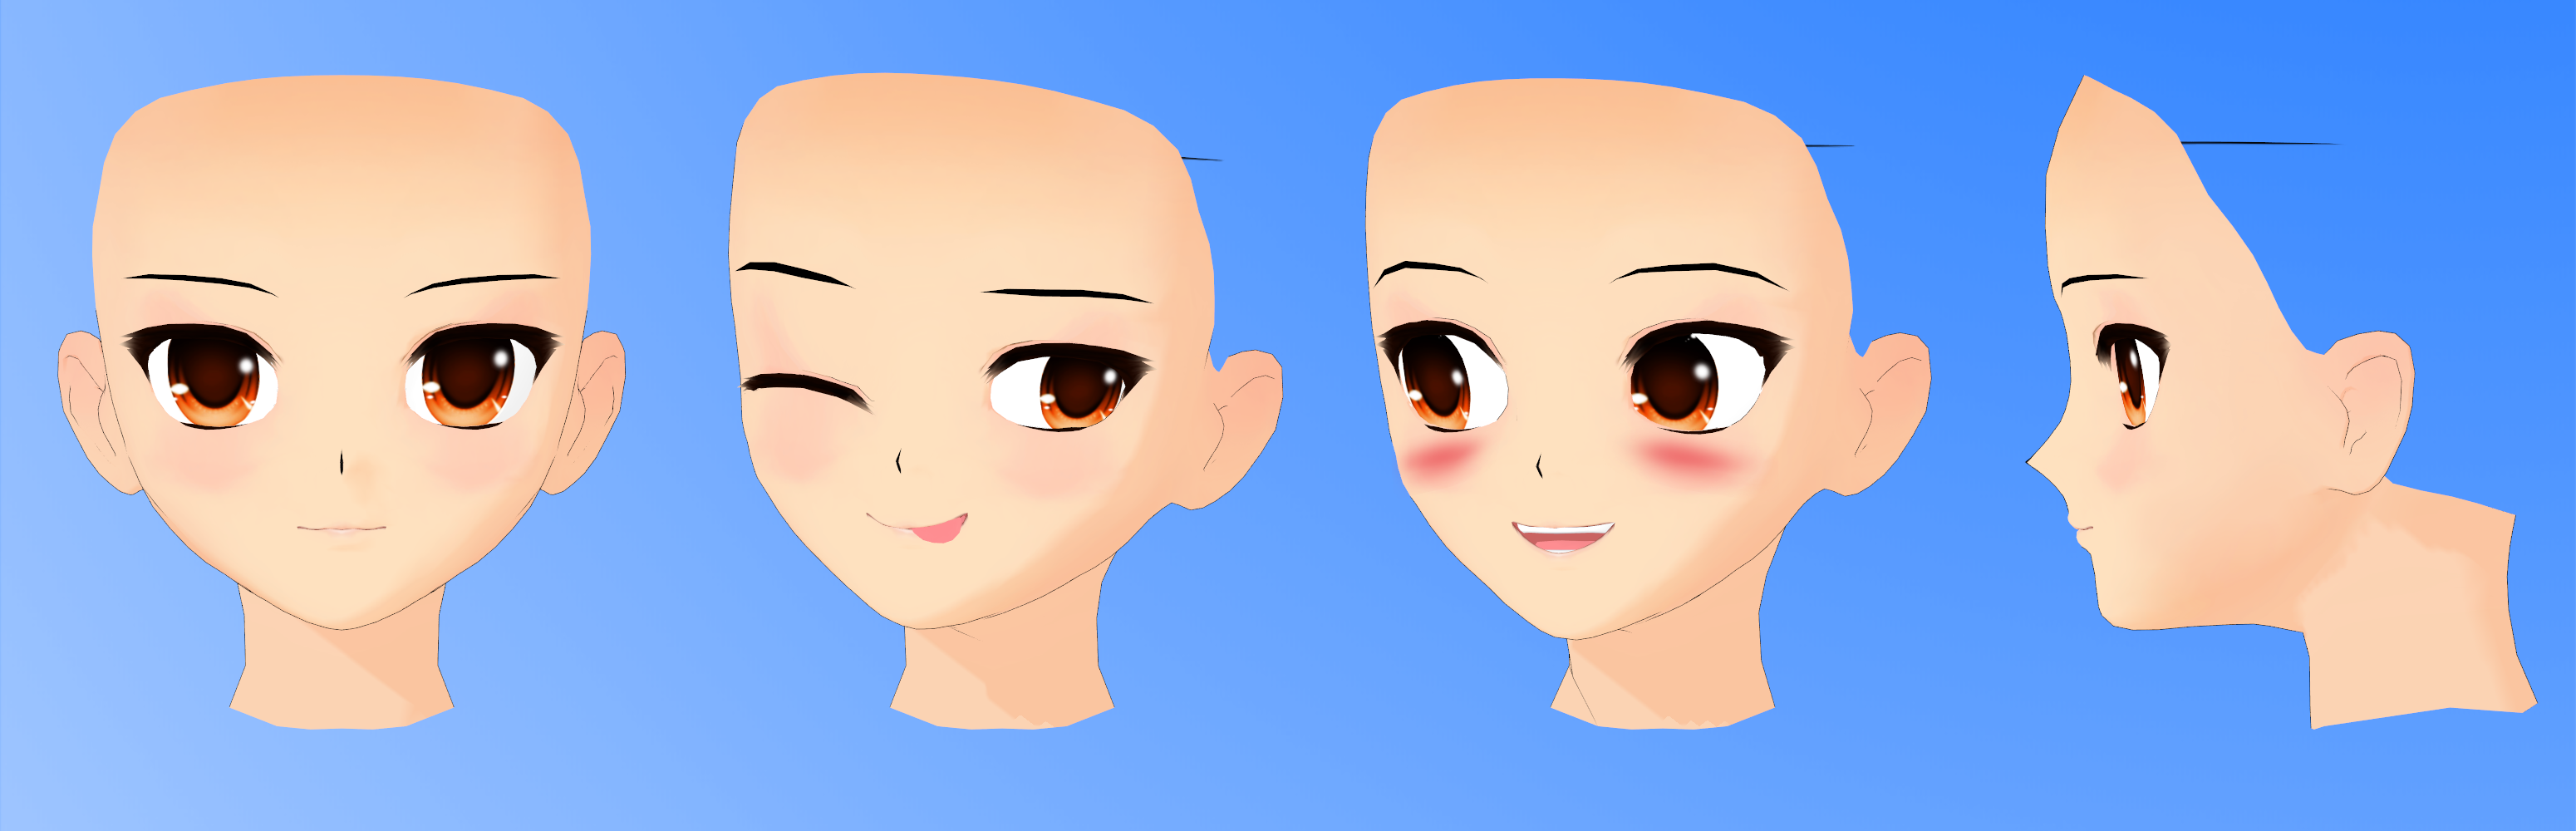 MMD male face. TGA face MMD. Base no face. Based heads